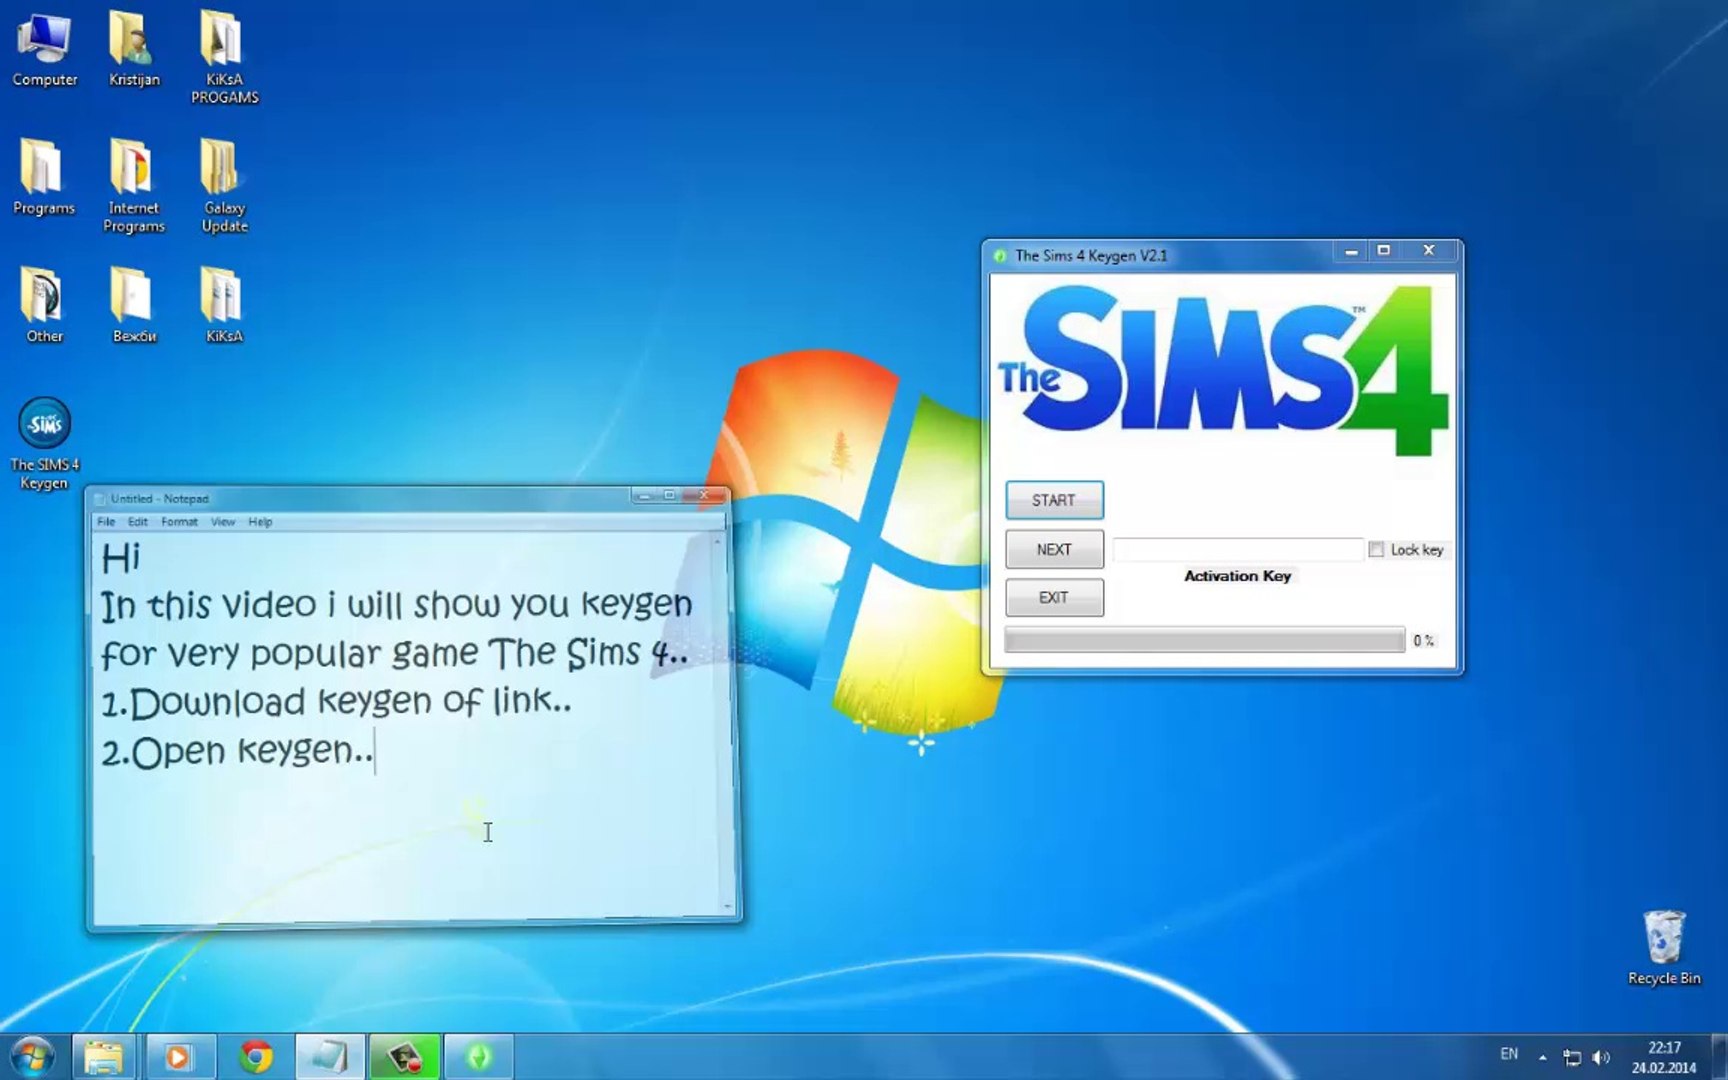 The Sims 4 Key Generator DOWNLOAD NOW (Limited time) !!! - video Dailymotion